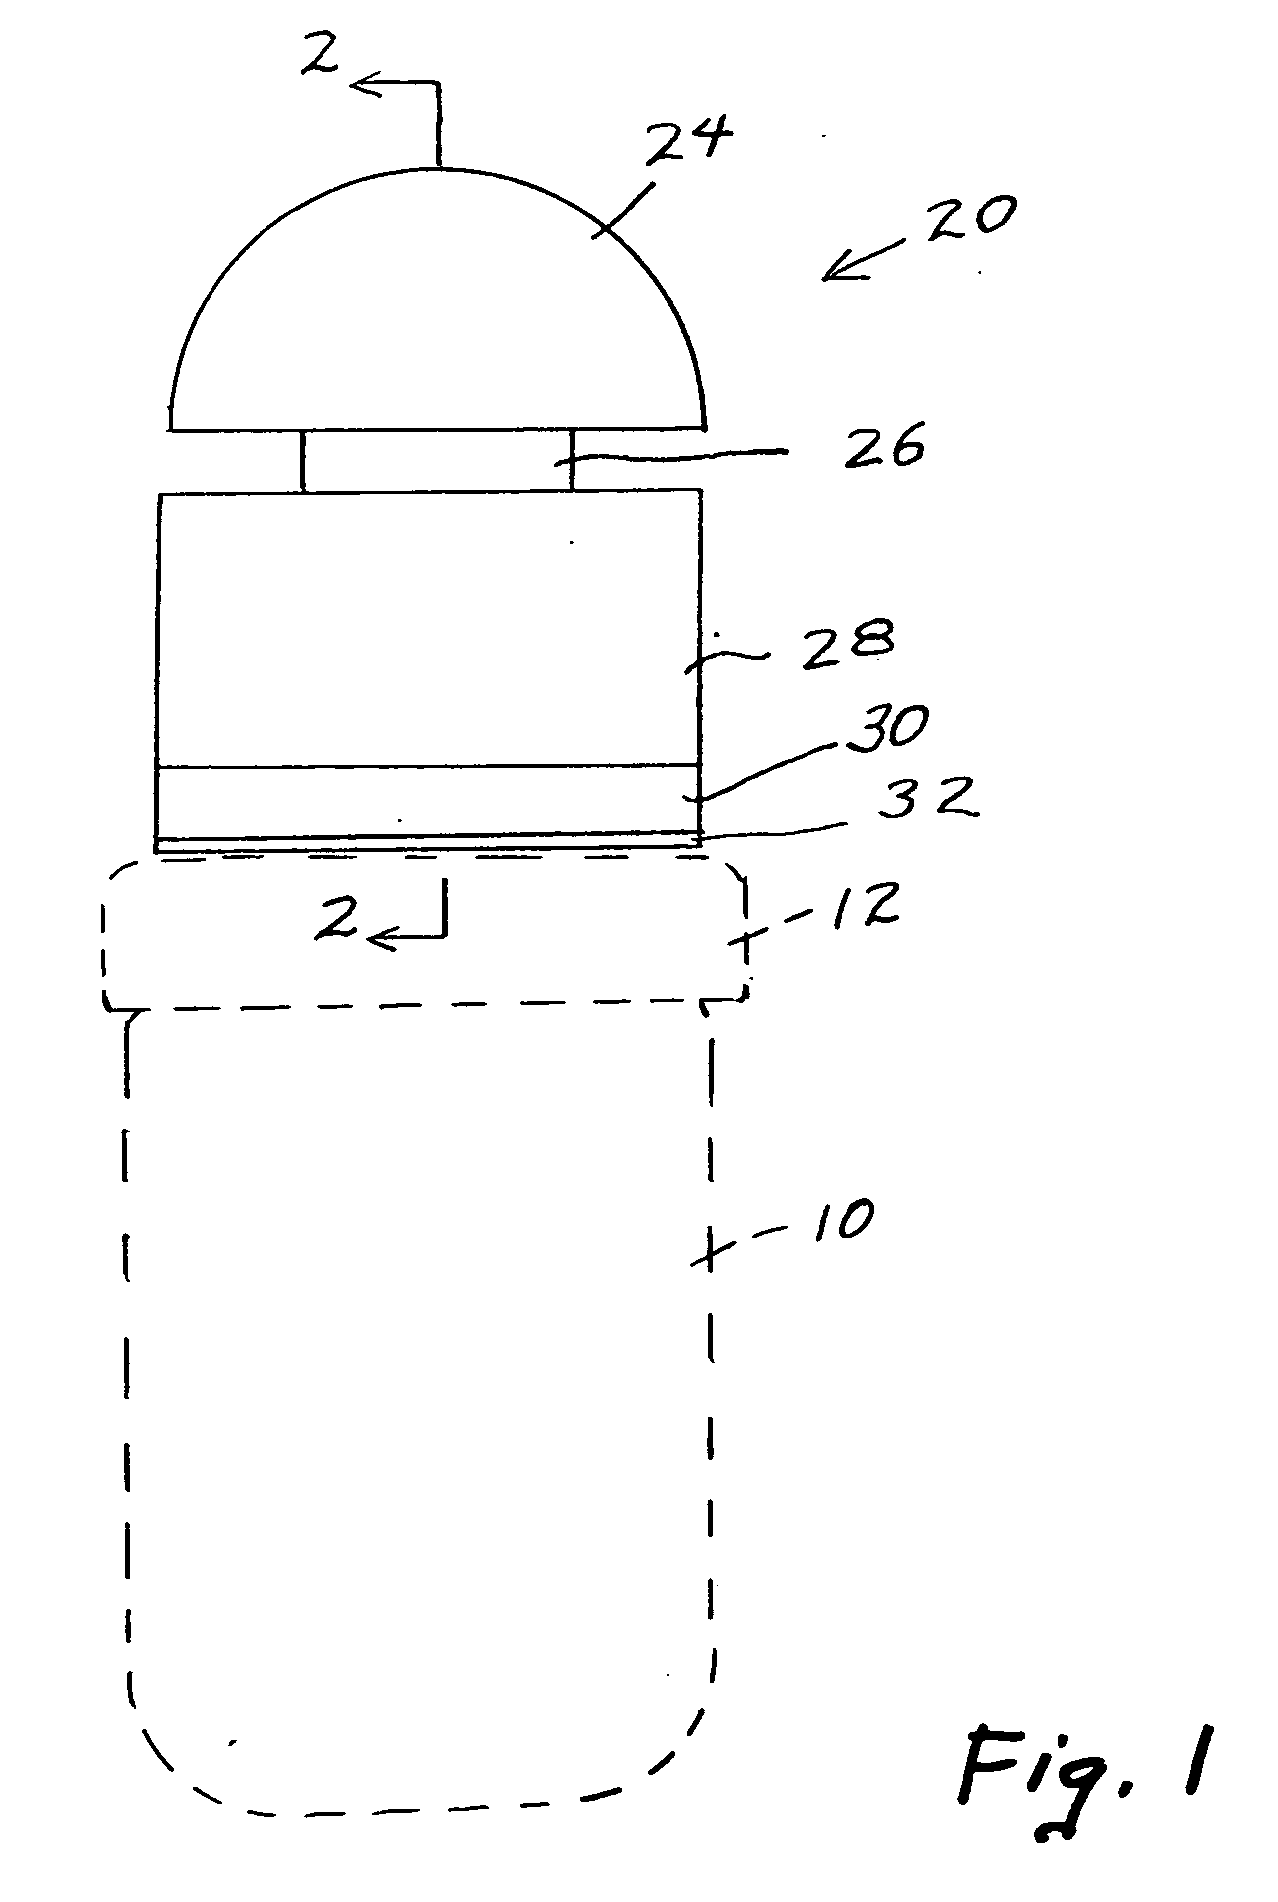 Apparatus and method for opening jars